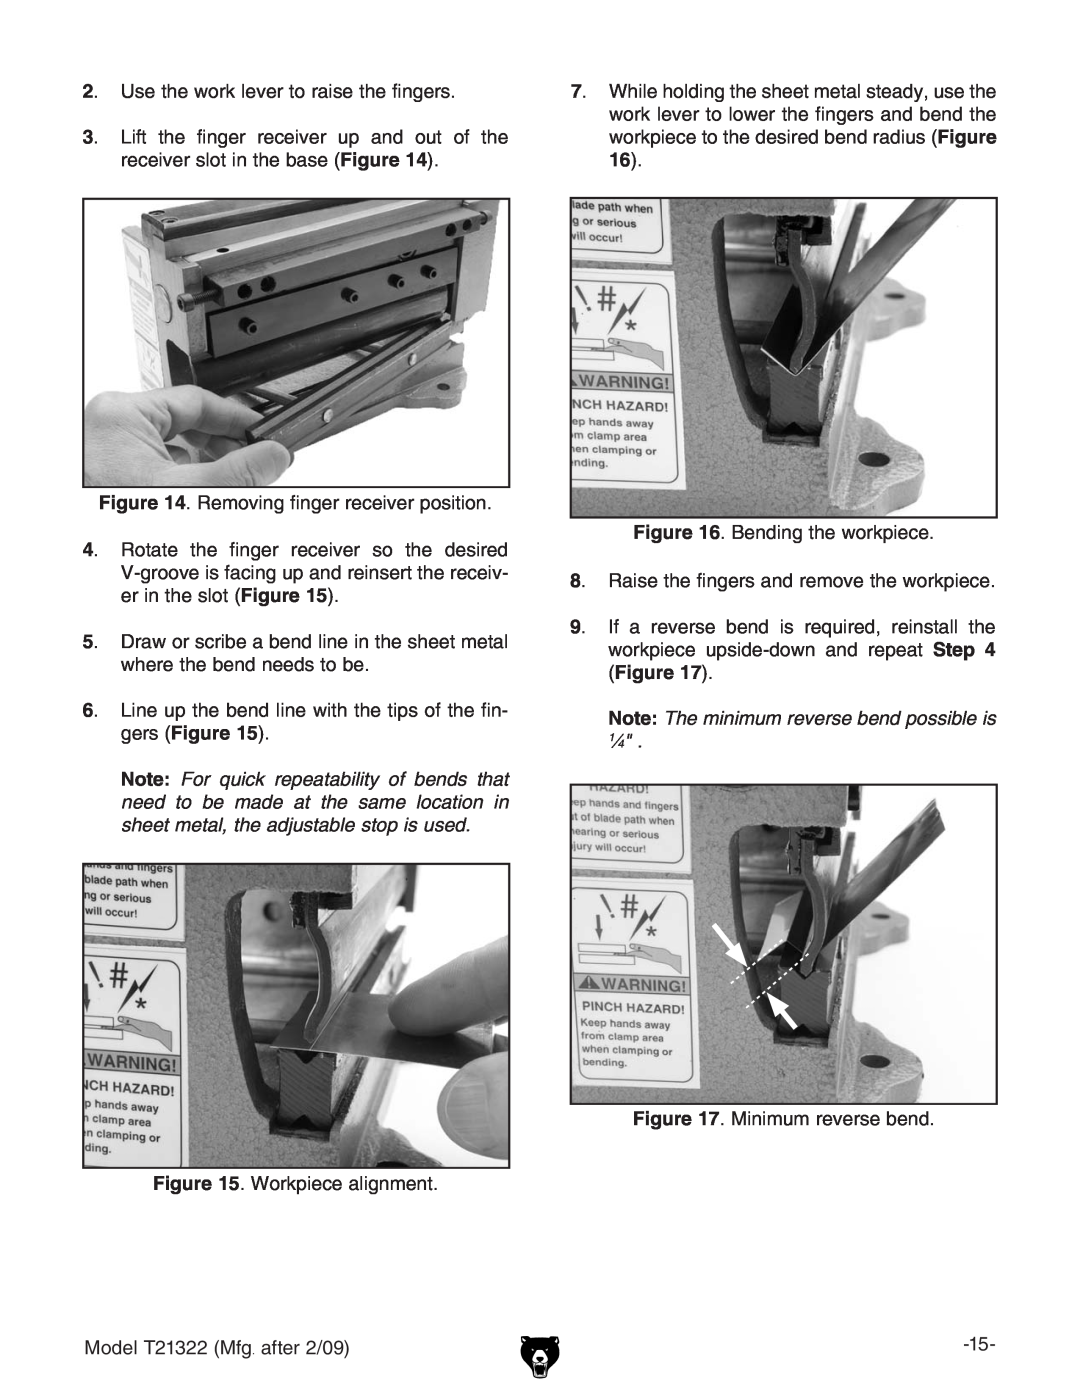 Grizzly T21322 owner manual Note The minimum reverse bend possible is 1⁄4, 2# JhZiZldg`aZkZgidgVhZiZc\Zgh# 